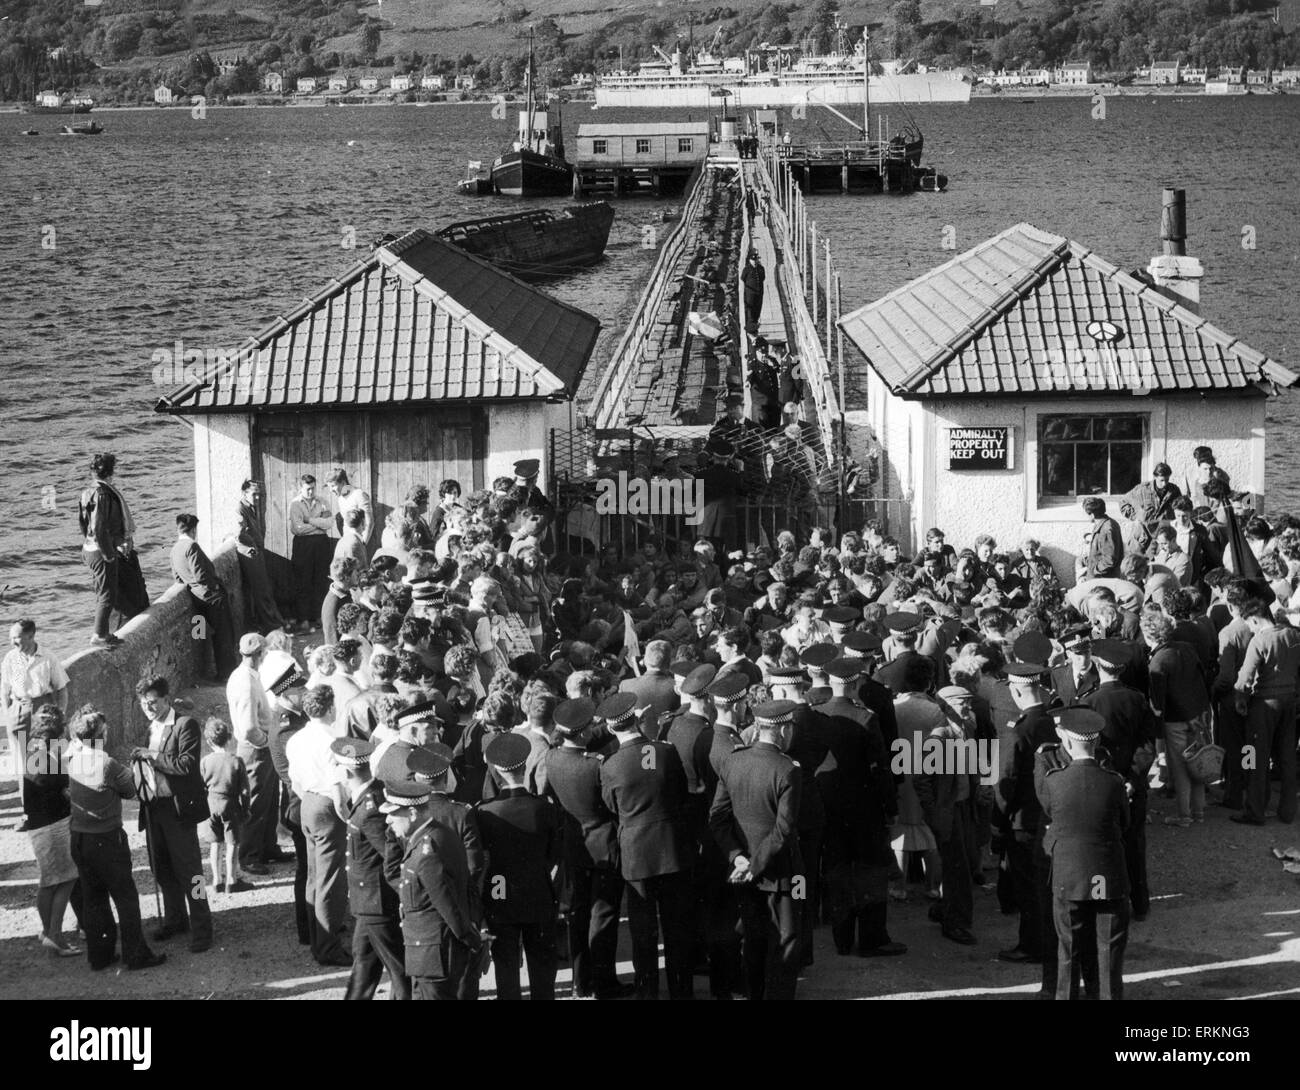 The scene at Ardnadam Pier during the demonstration. The Proteus is seen in the background as crowds gather in protest. 22nd May 1961. Stock Photo